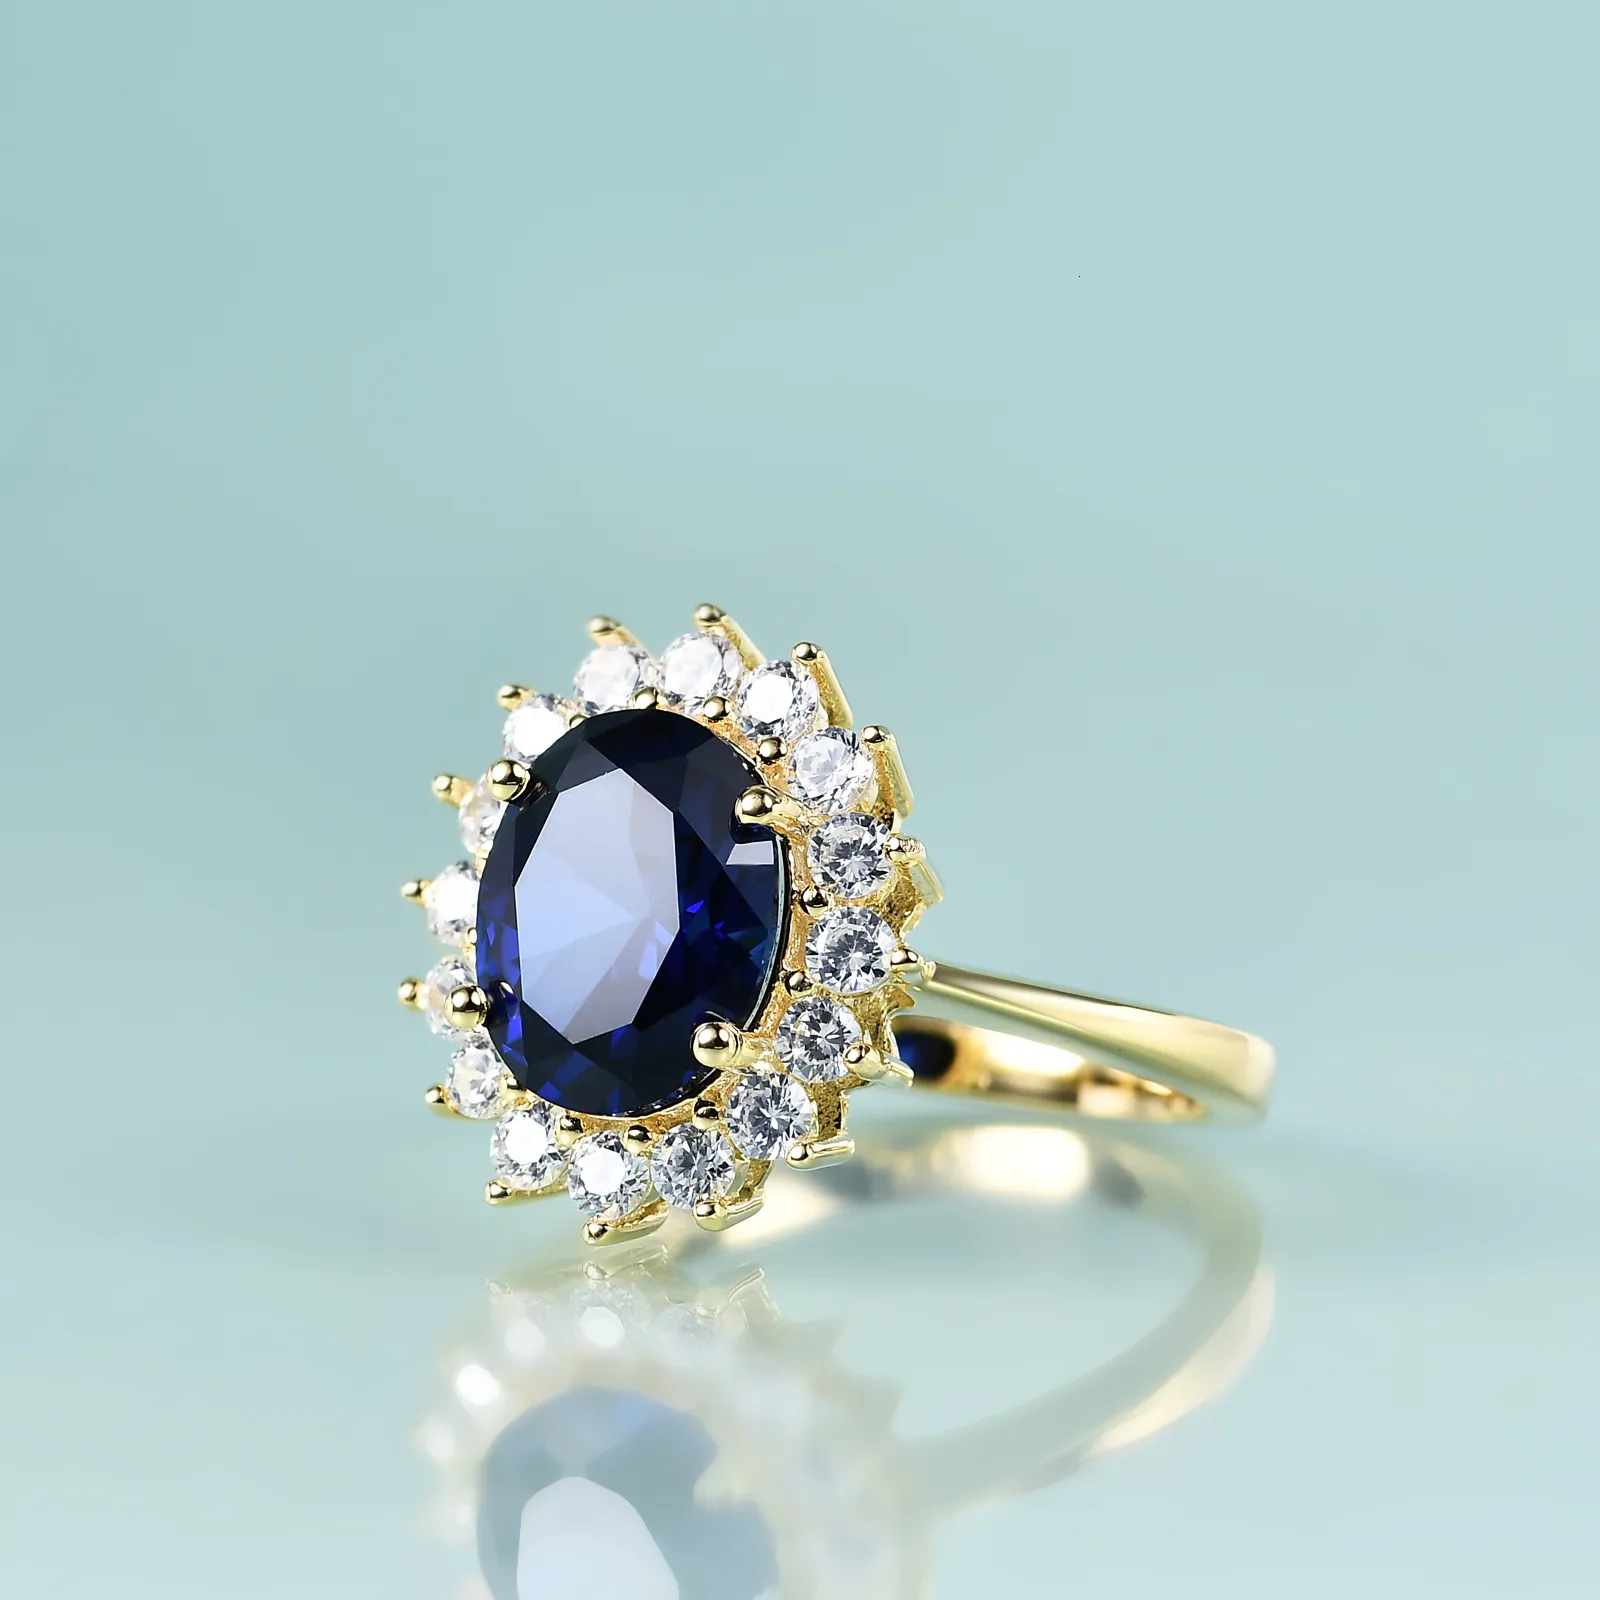 Solitaire Ring Gem's Beauty Princess Diana Inspired Statement Engagement Ring 14K Gold Filled Sterling Silver Lab Blue Sapphire Birthstone Ring 230607